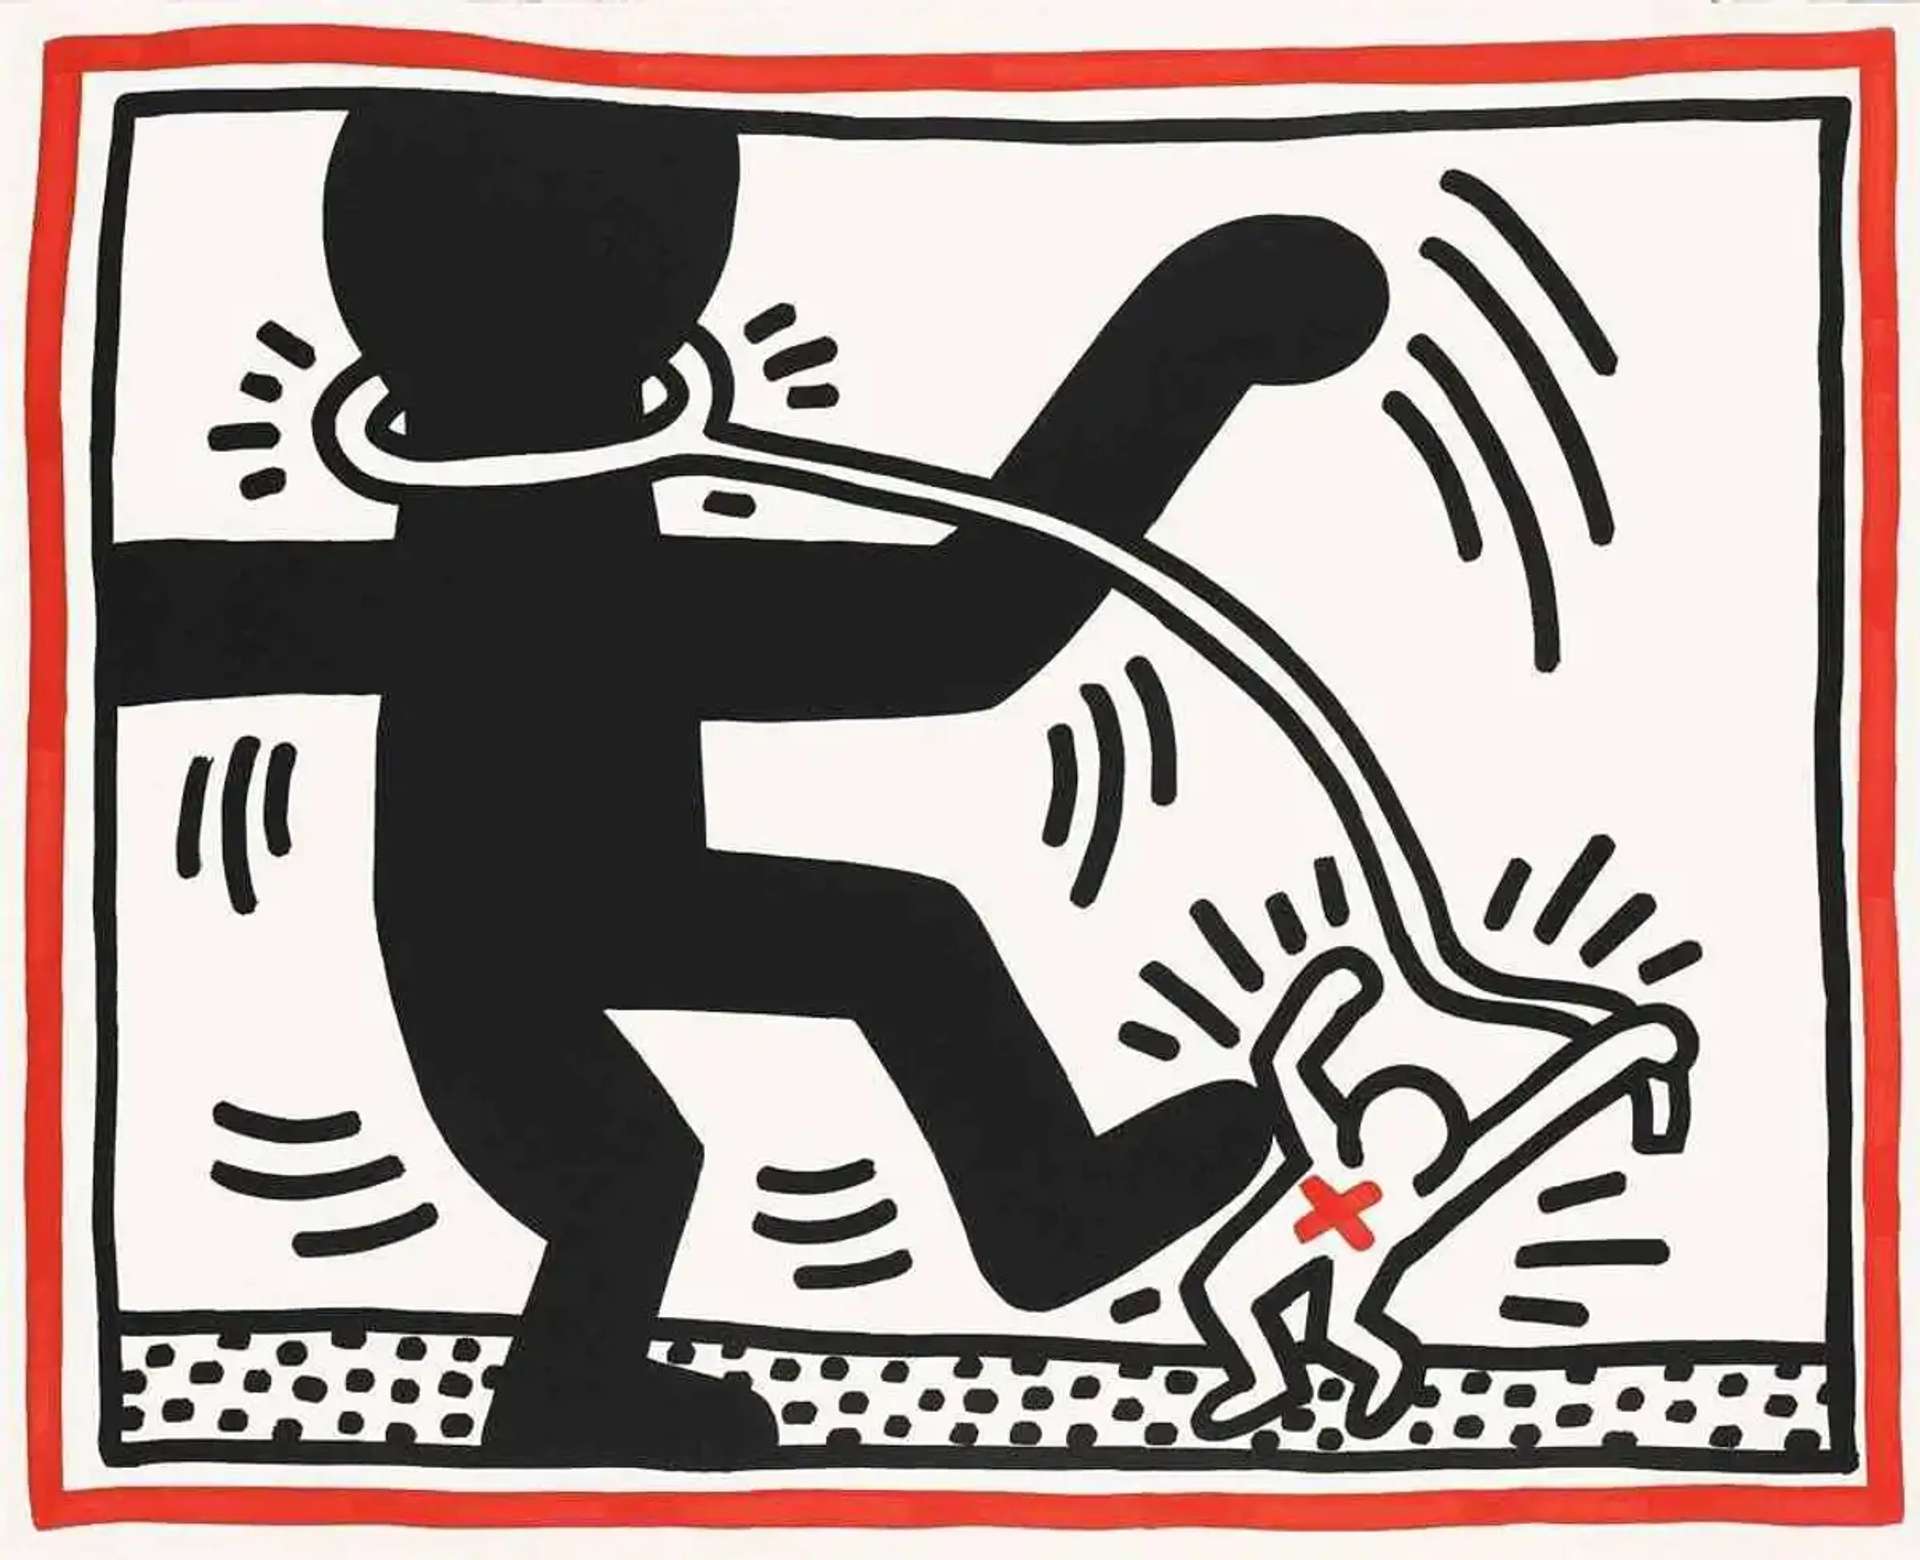 A black figure raising its foot, stepping on the outline of a white figure in the style of Pop Art.